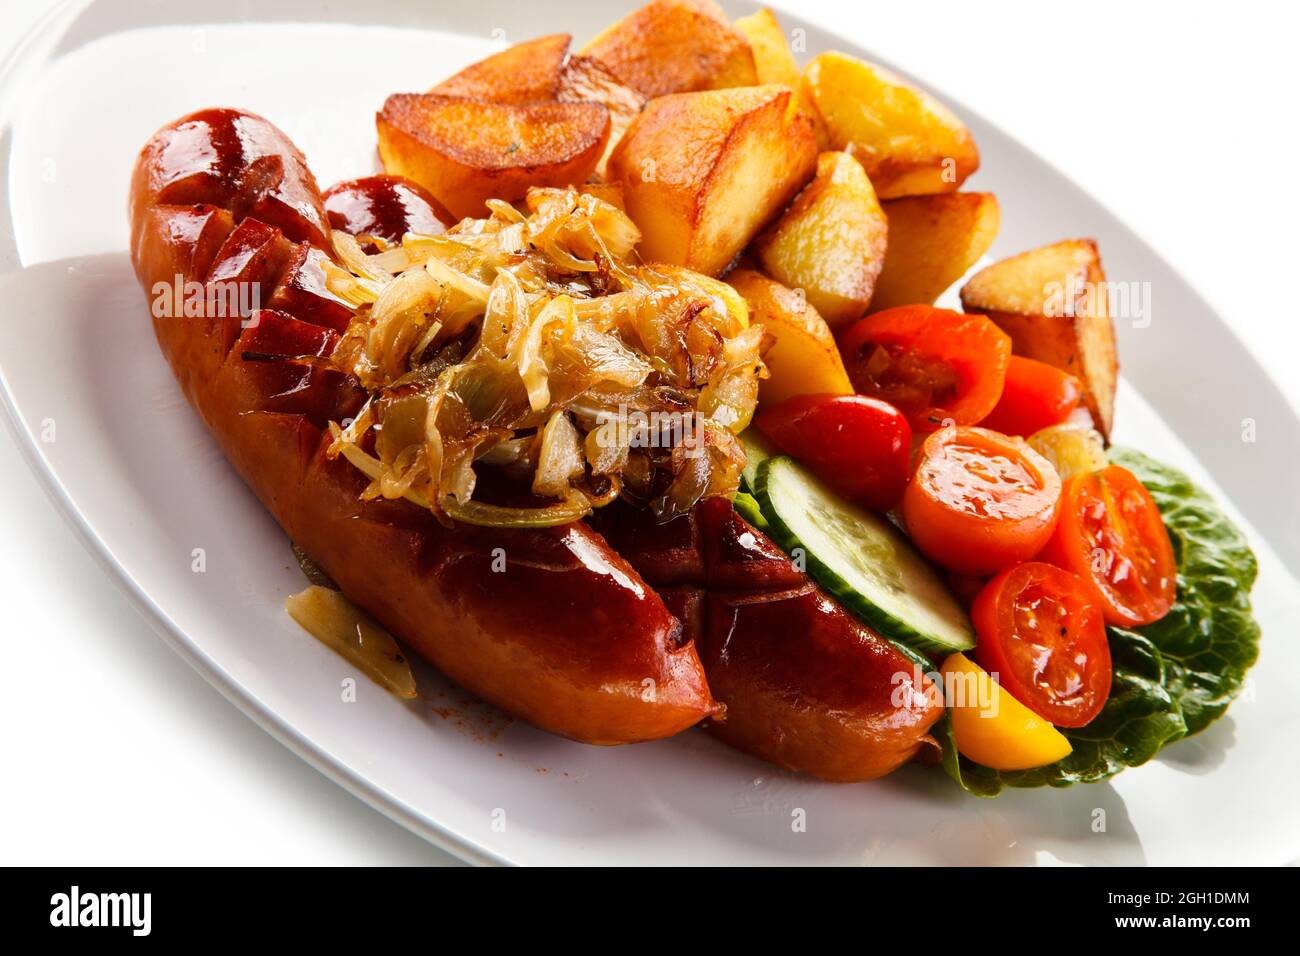 Classical food dishes, Stock Photo